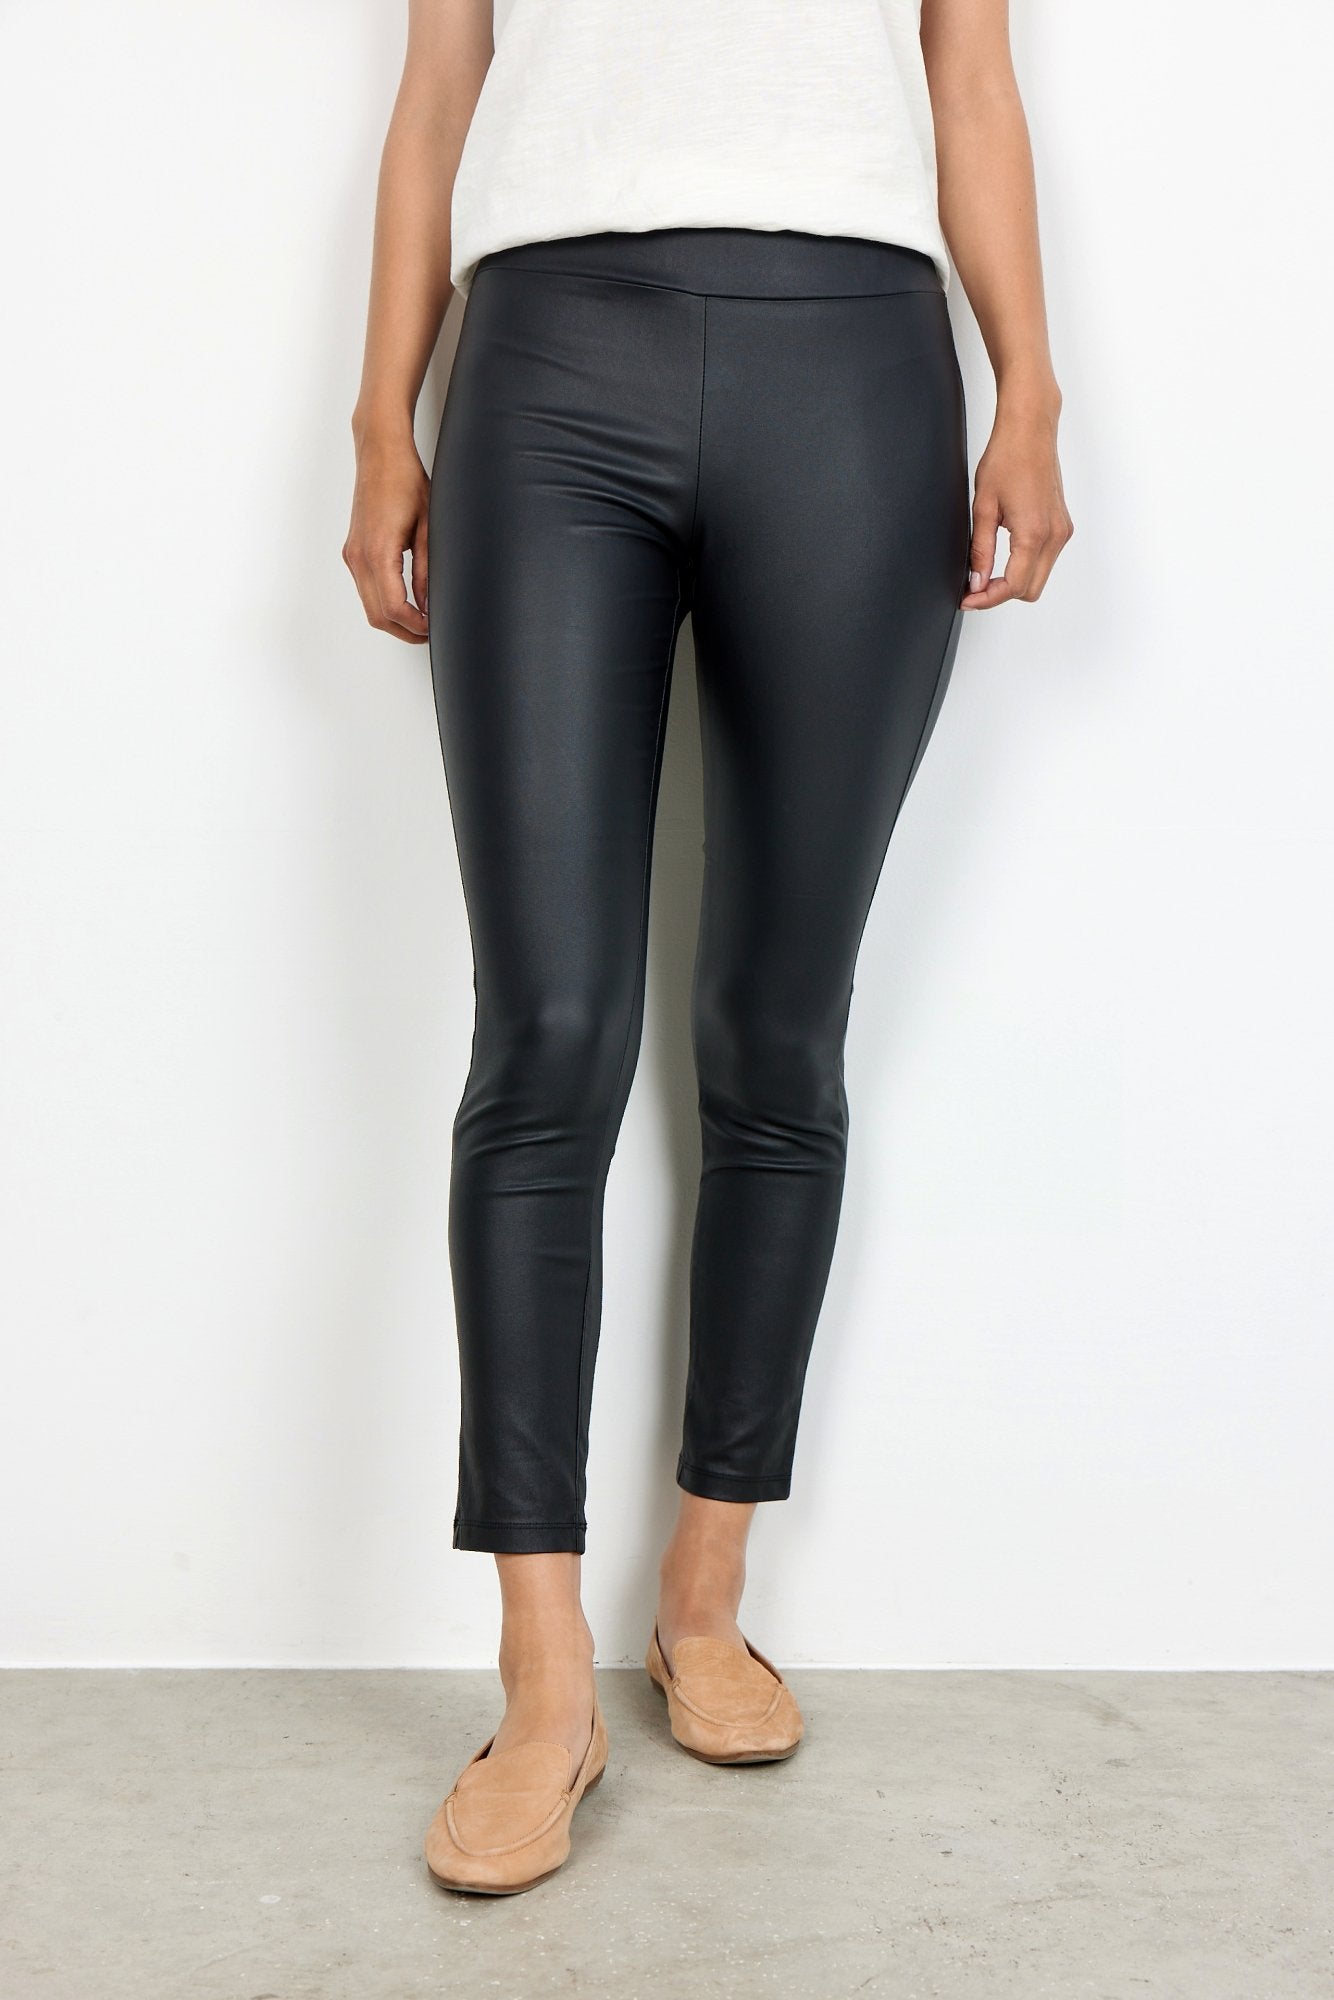 Soyaconcept | 2-B – SC-PAM from in soyaconcept soyaconcept Pants Black